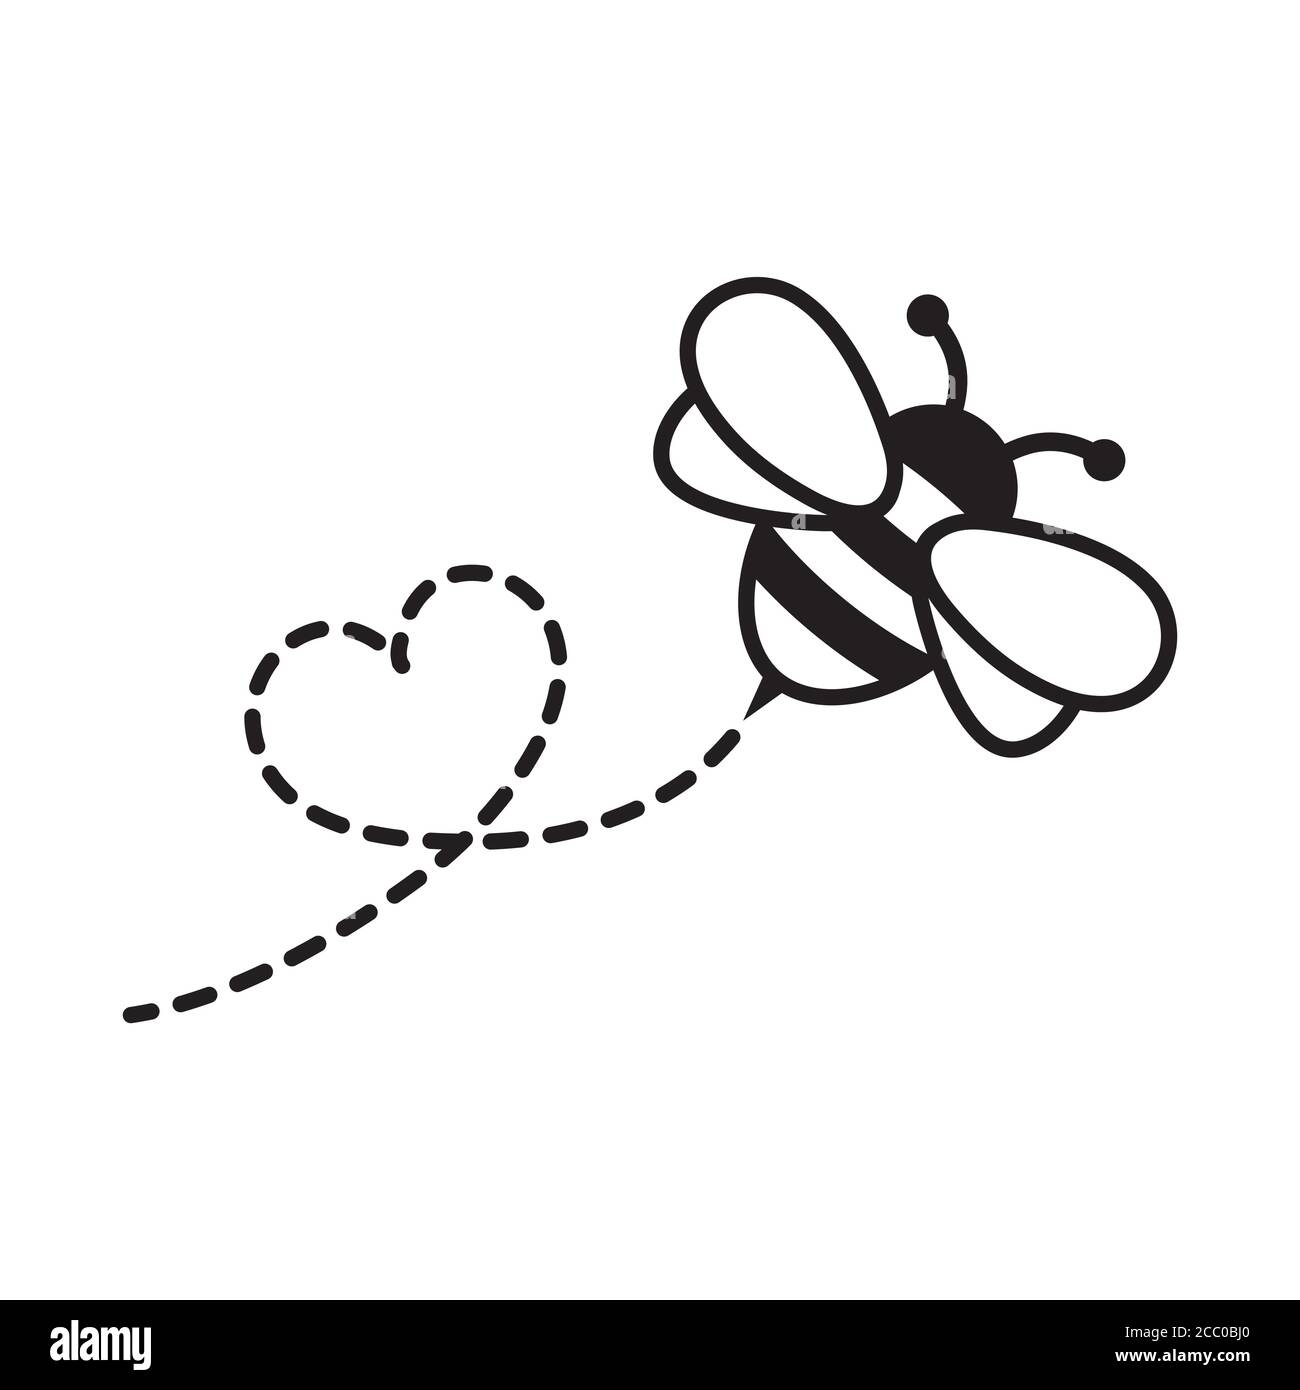 Cartoon Bee Flying on a Heart Shaped Dotted Route Stock Vector Image & Art  - Alamy